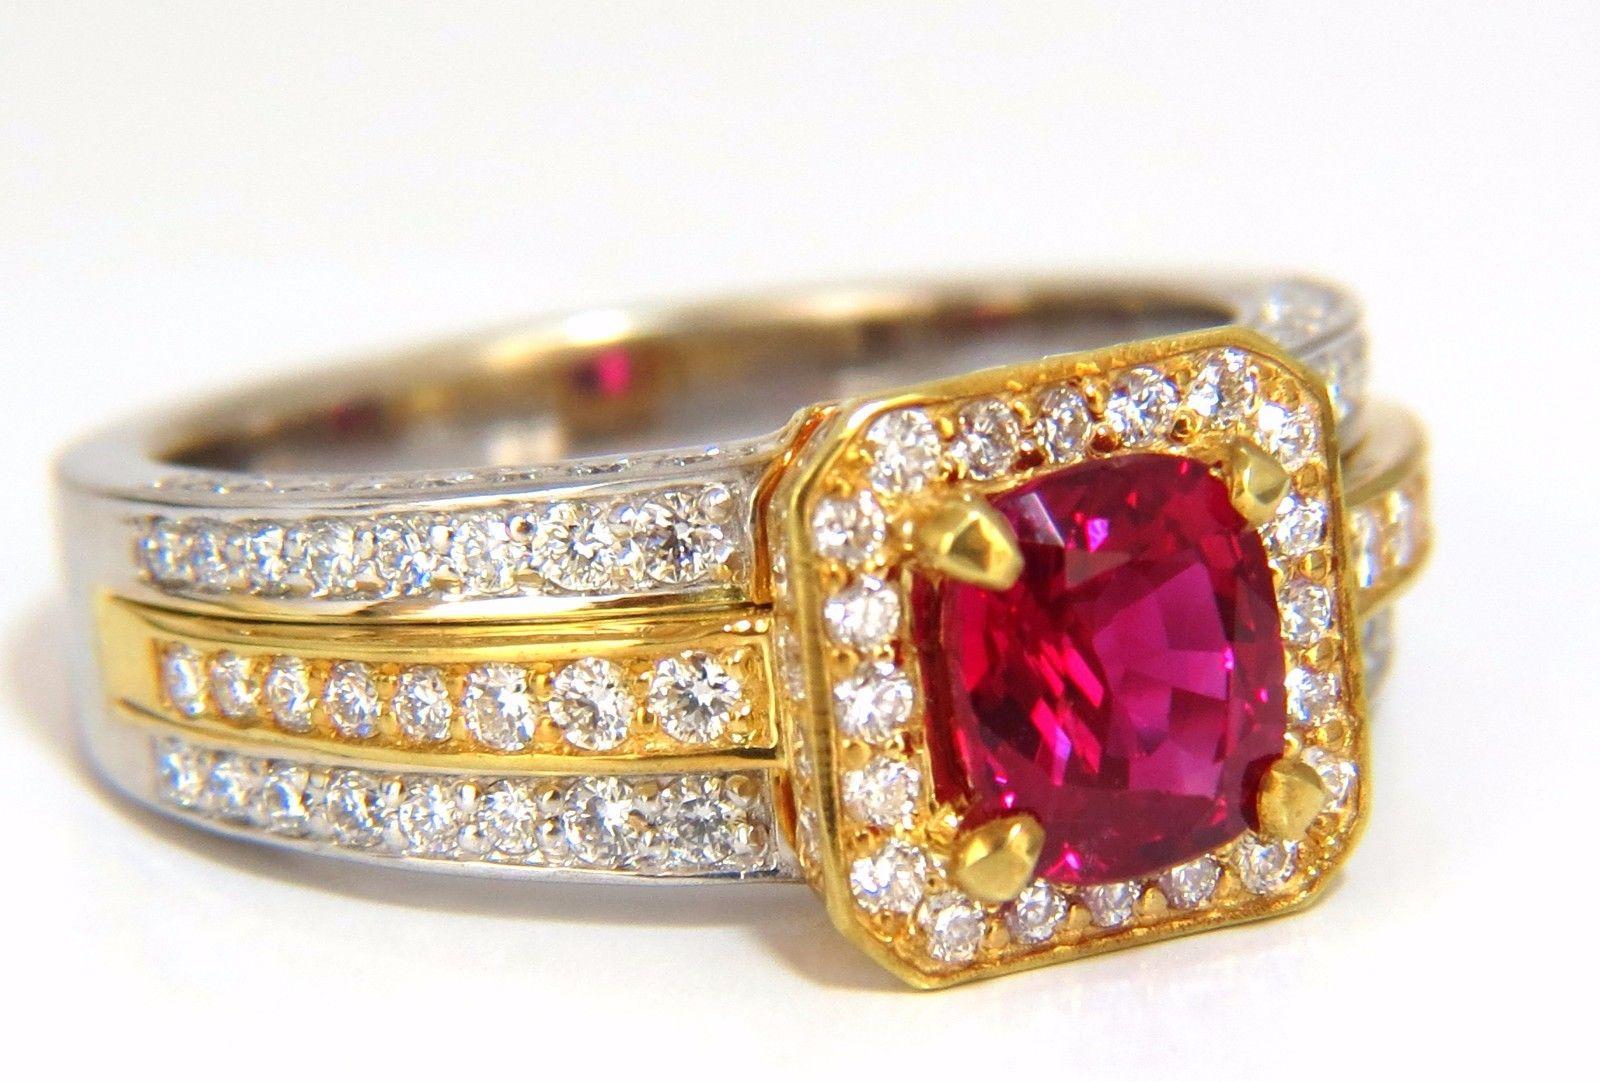 Oval Cut GIA Certified 2.54 Carat Vivid Red Ruby Diamonds Ring For Sale